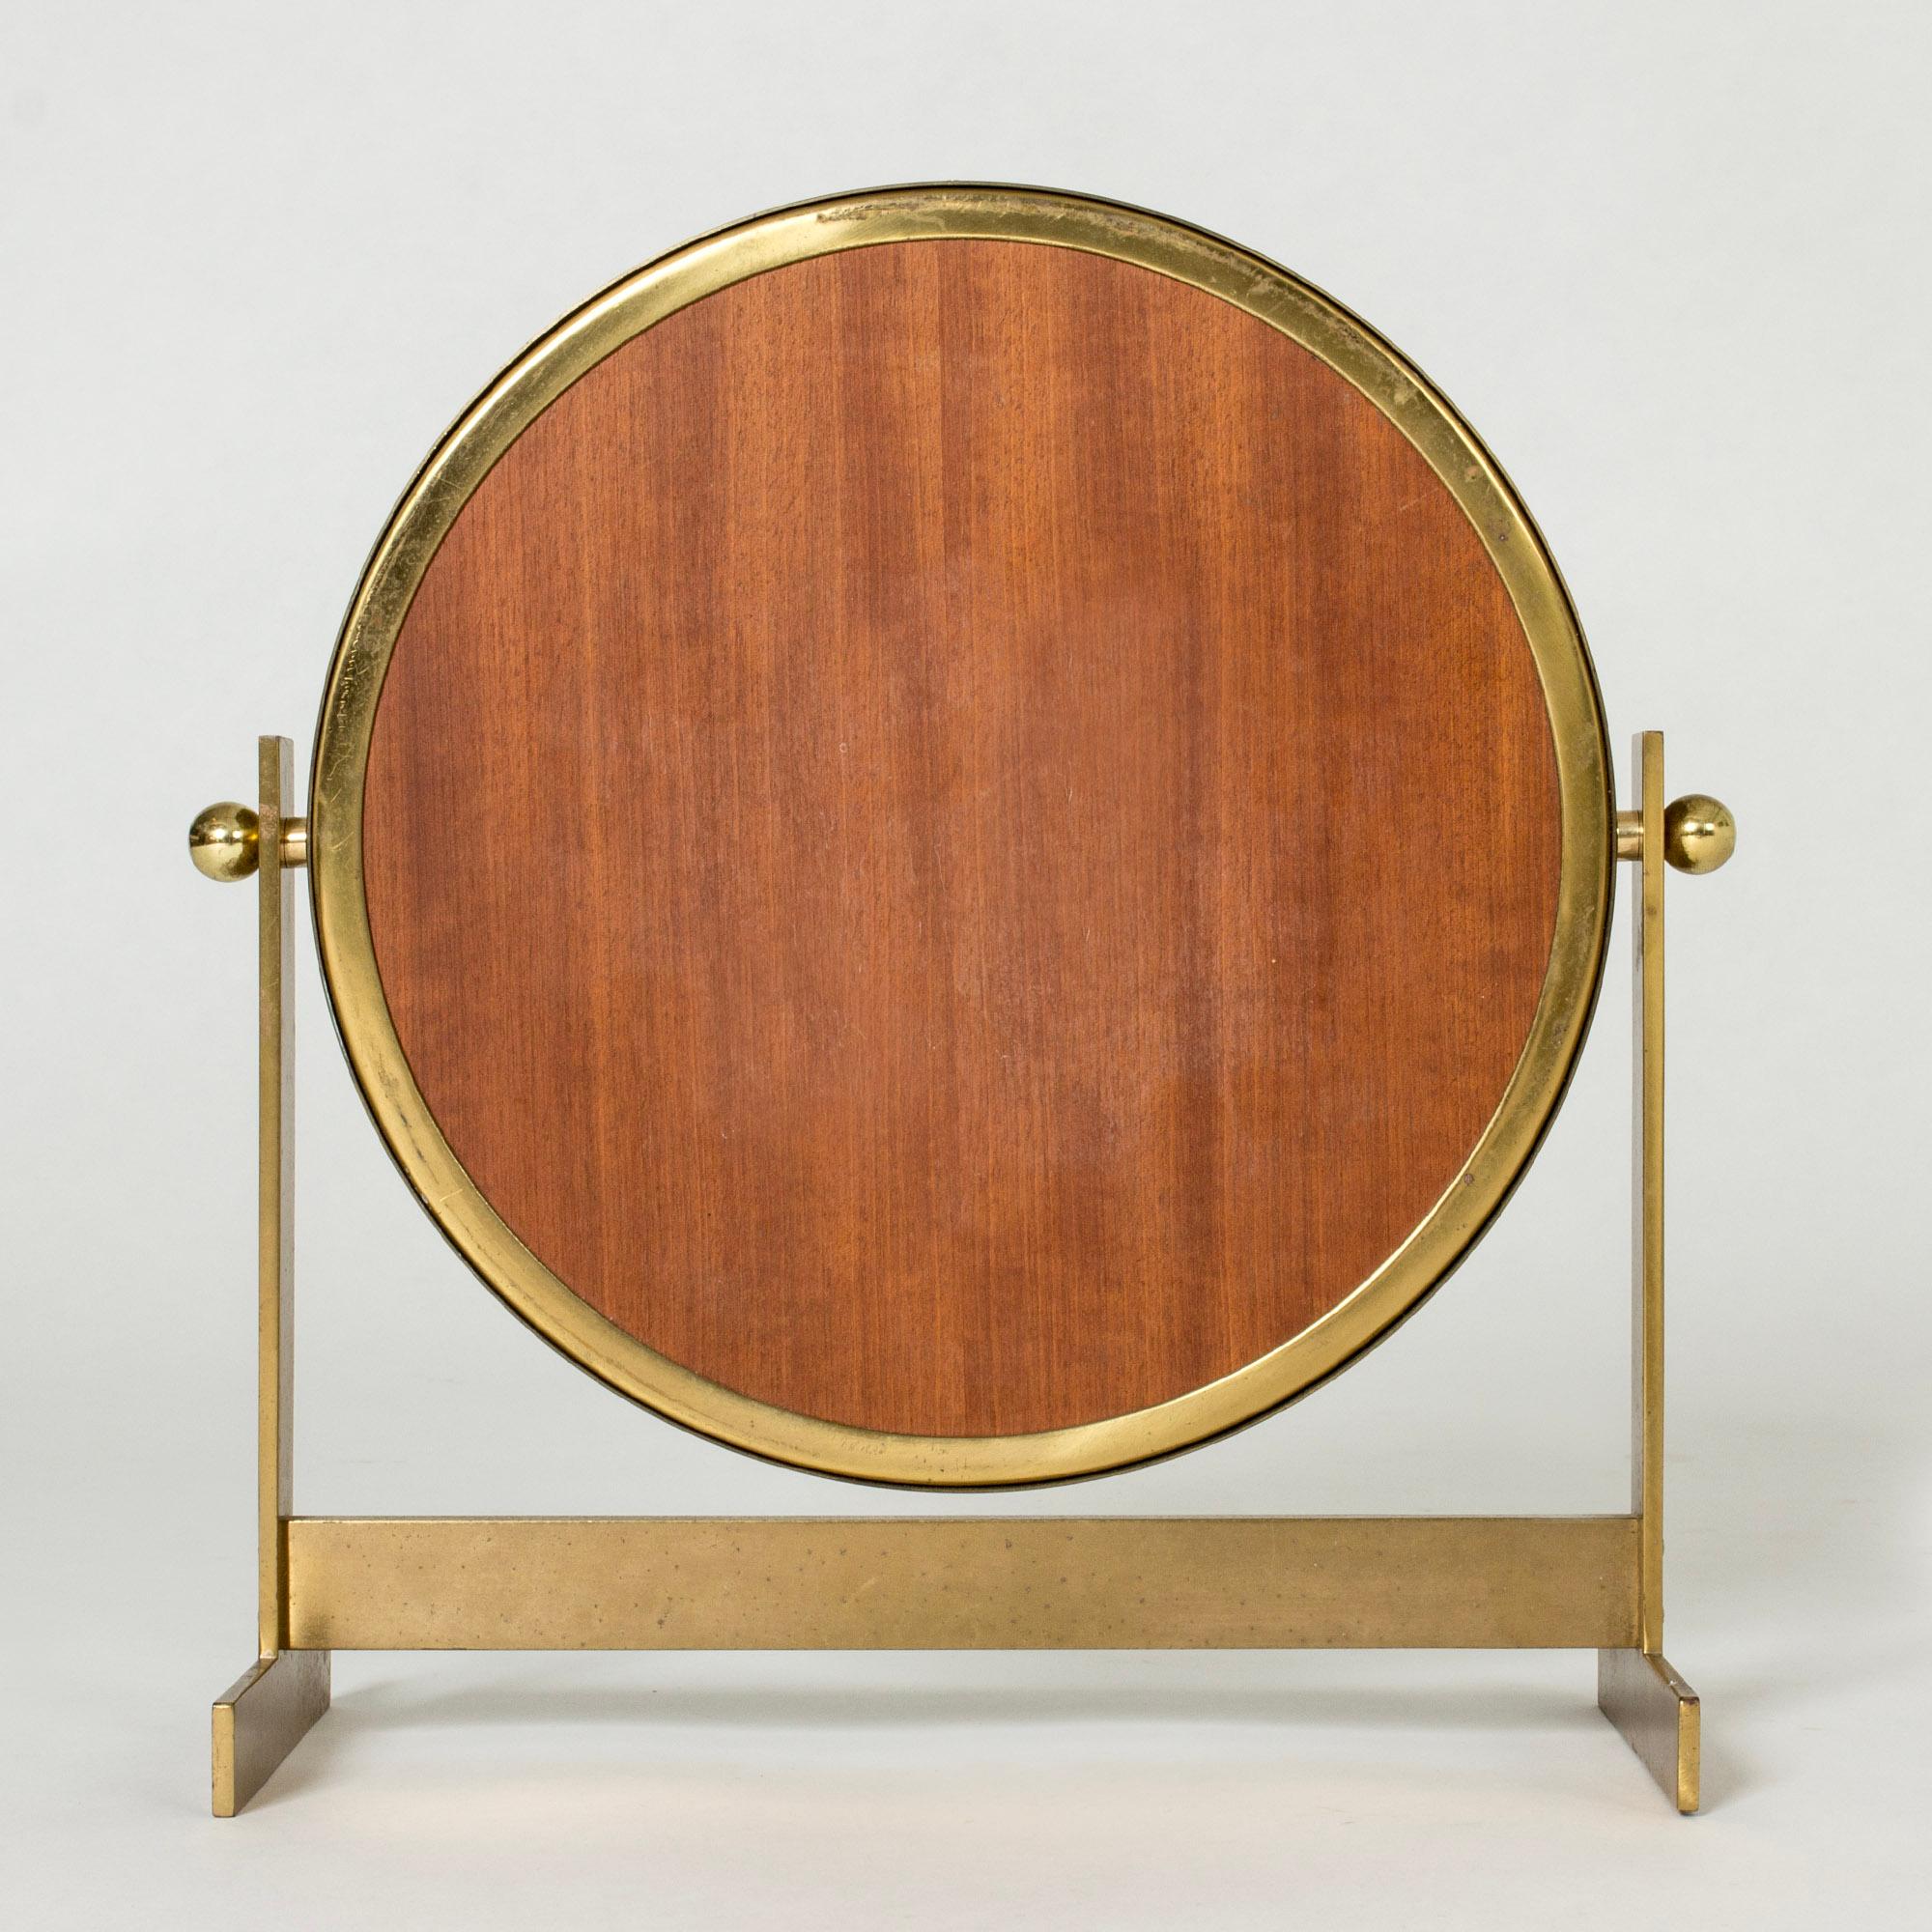 Mid-20th Century Midcentury Modern Brass table mirror from HI-Gruppen, Sweden, 1950s For Sale